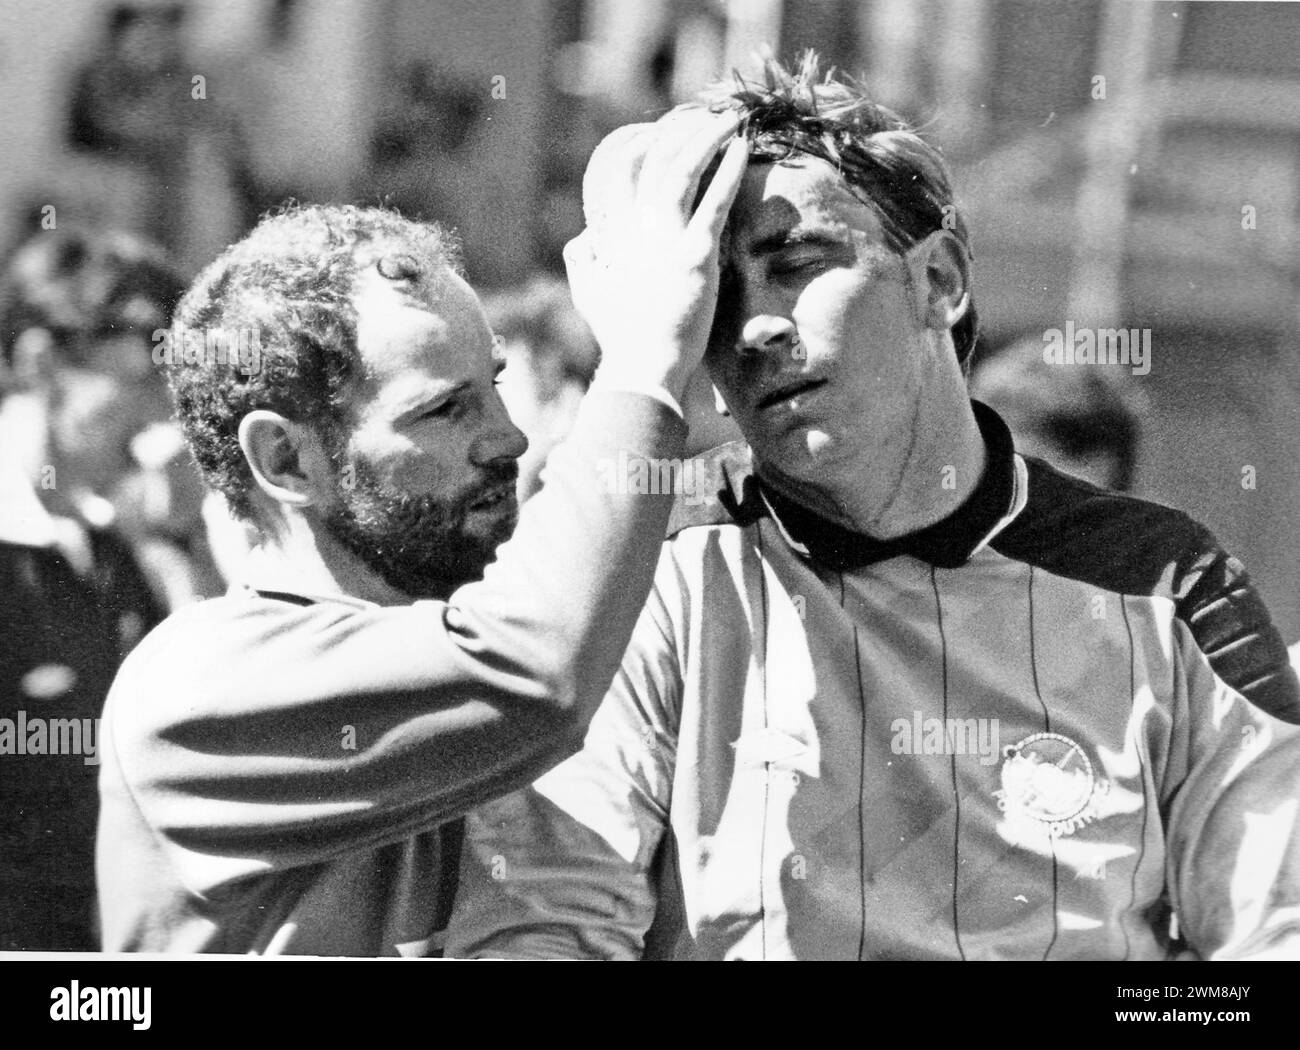 POMPEY GOALKEEPER IS HELPED OFF BY PHYSIO JOHN DICKEN AFTER A COLLISION WITH WATFORD'S LUTHER BLISSETT 1986 PIC MIKE WALKER 1986 Stock Photo